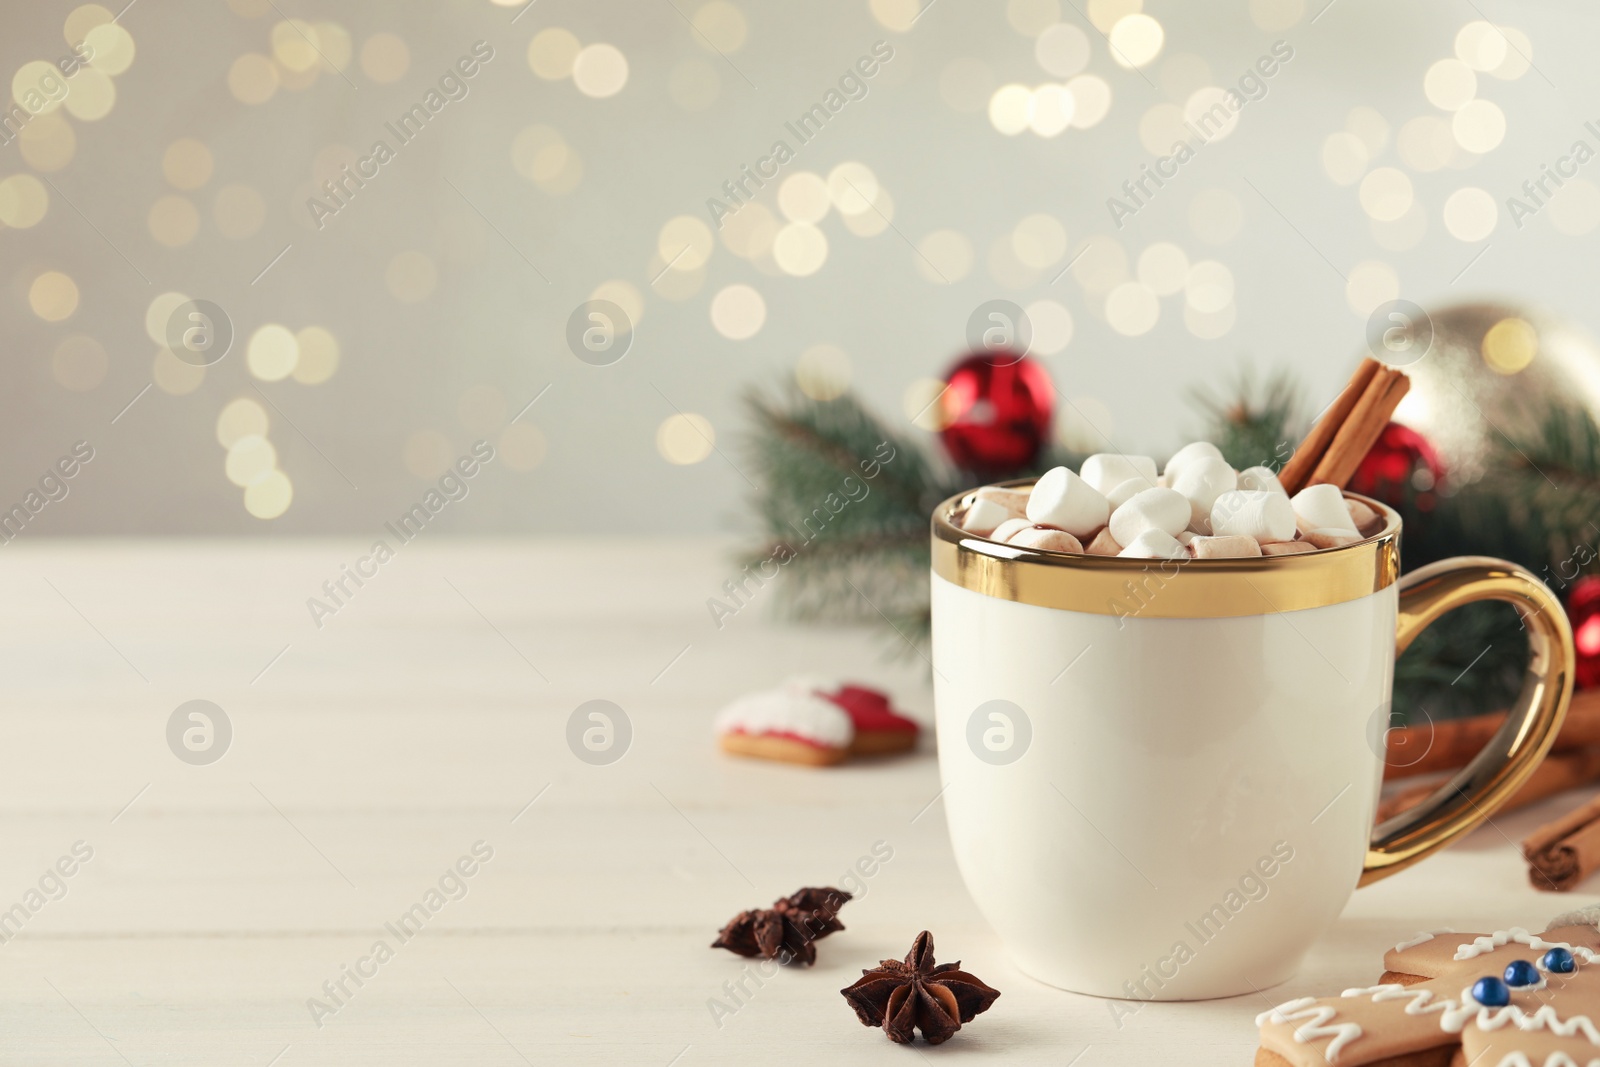 Photo of Delicious hot chocolate with marshmallows and cinnamon on white wooden table against blurred lights, space for text